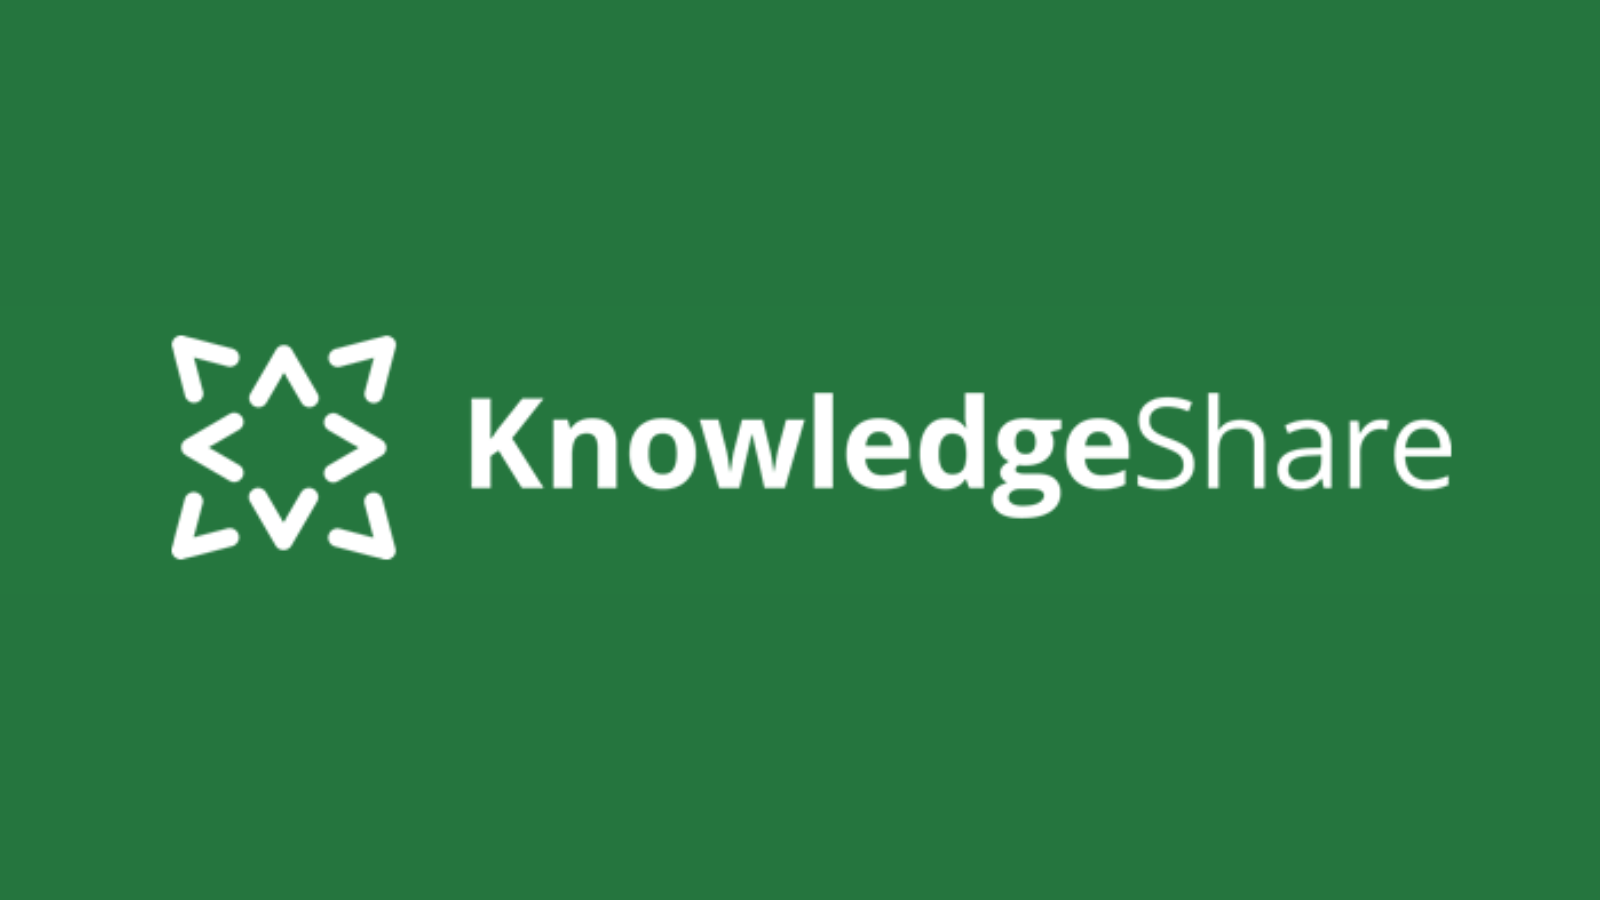 Knowledge Share Logo on green background